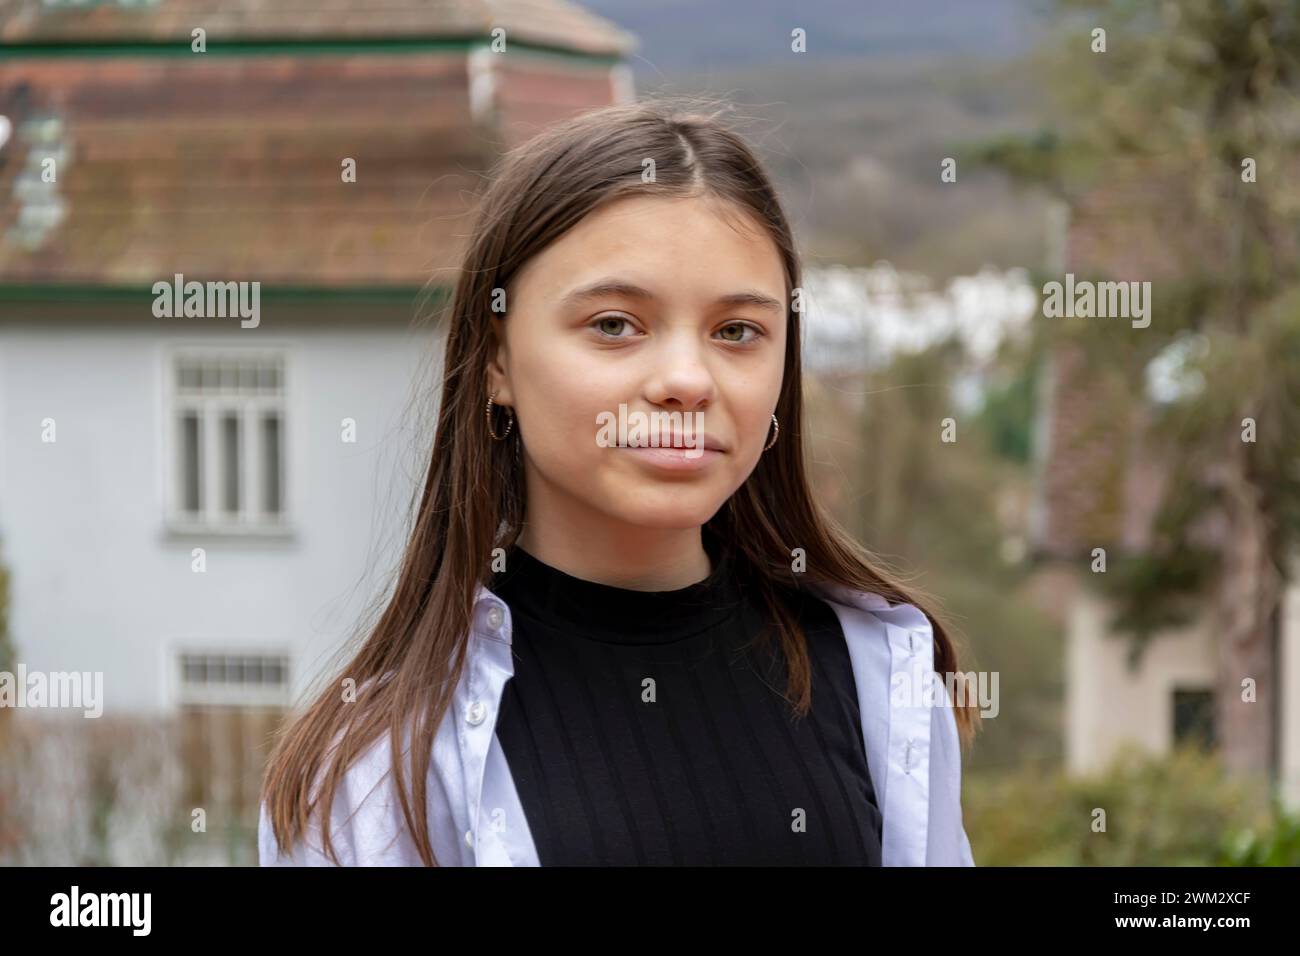 A teenage girl with long hair wearing a black shirt against a country landscape. Stock Photo